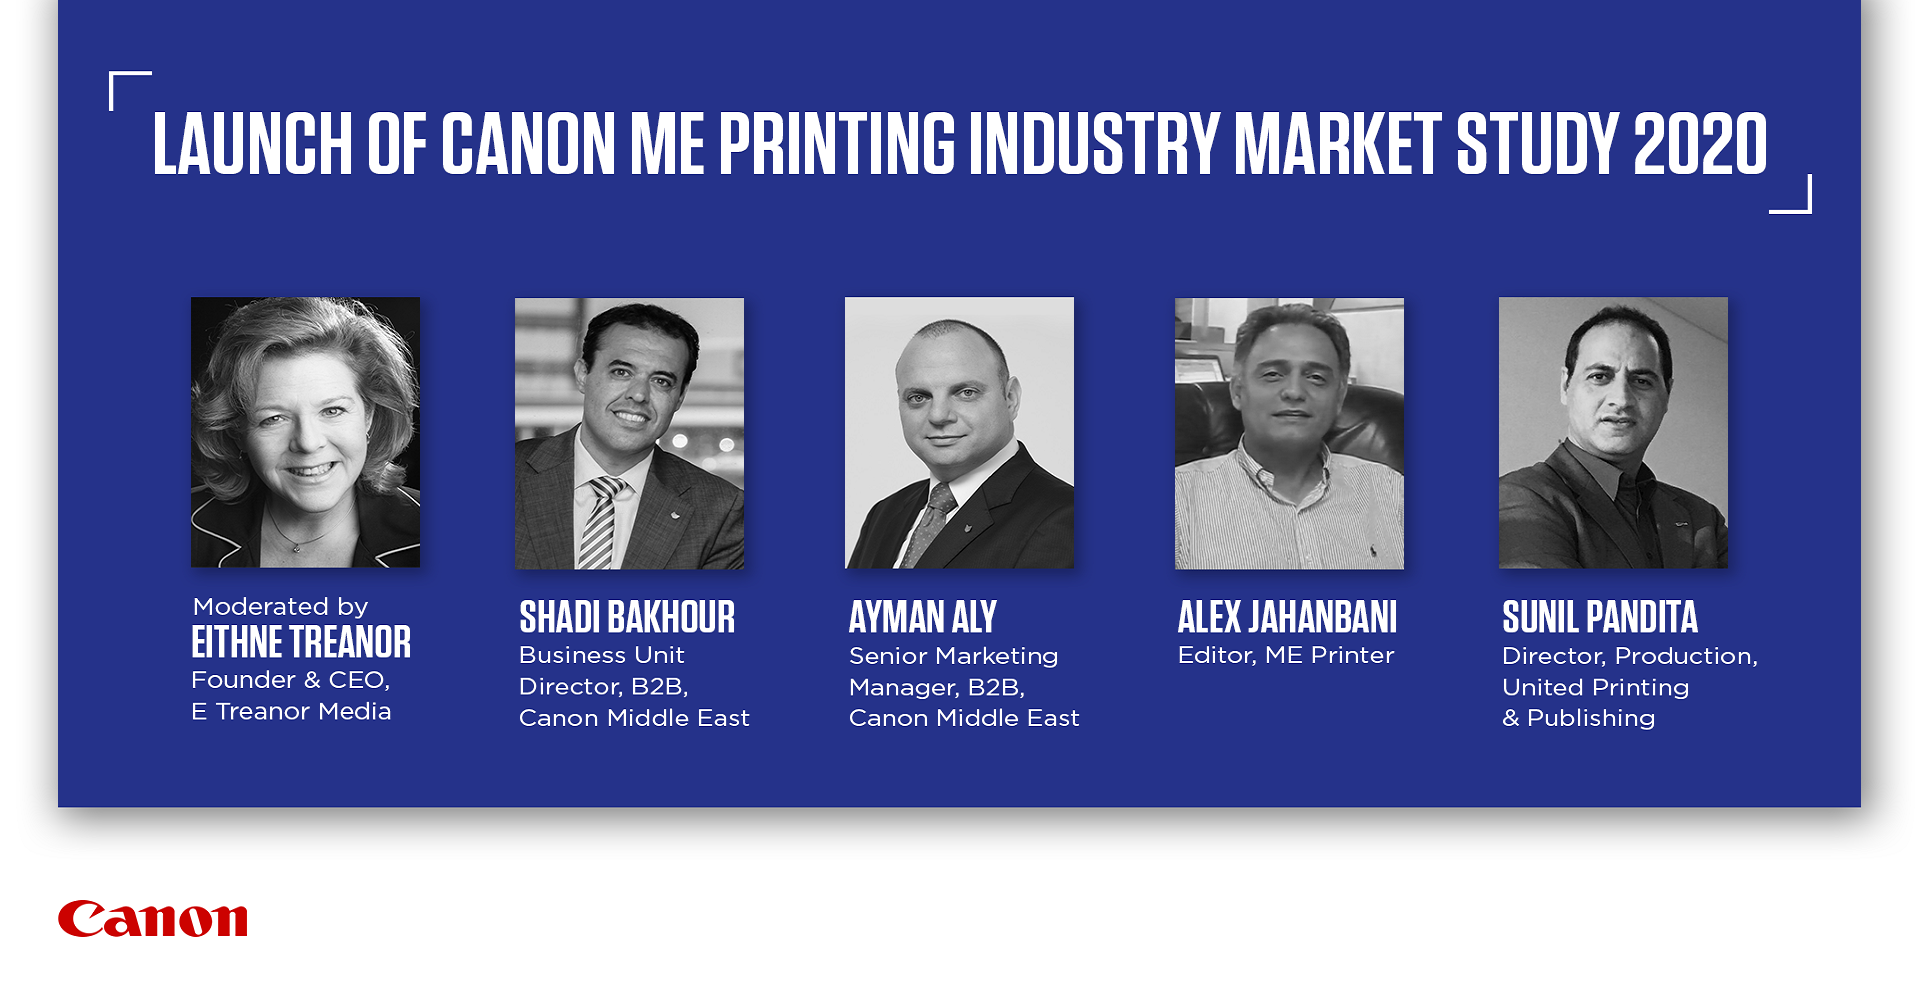 Emerging and latest trends in ME Printing Industry Post Covid-19